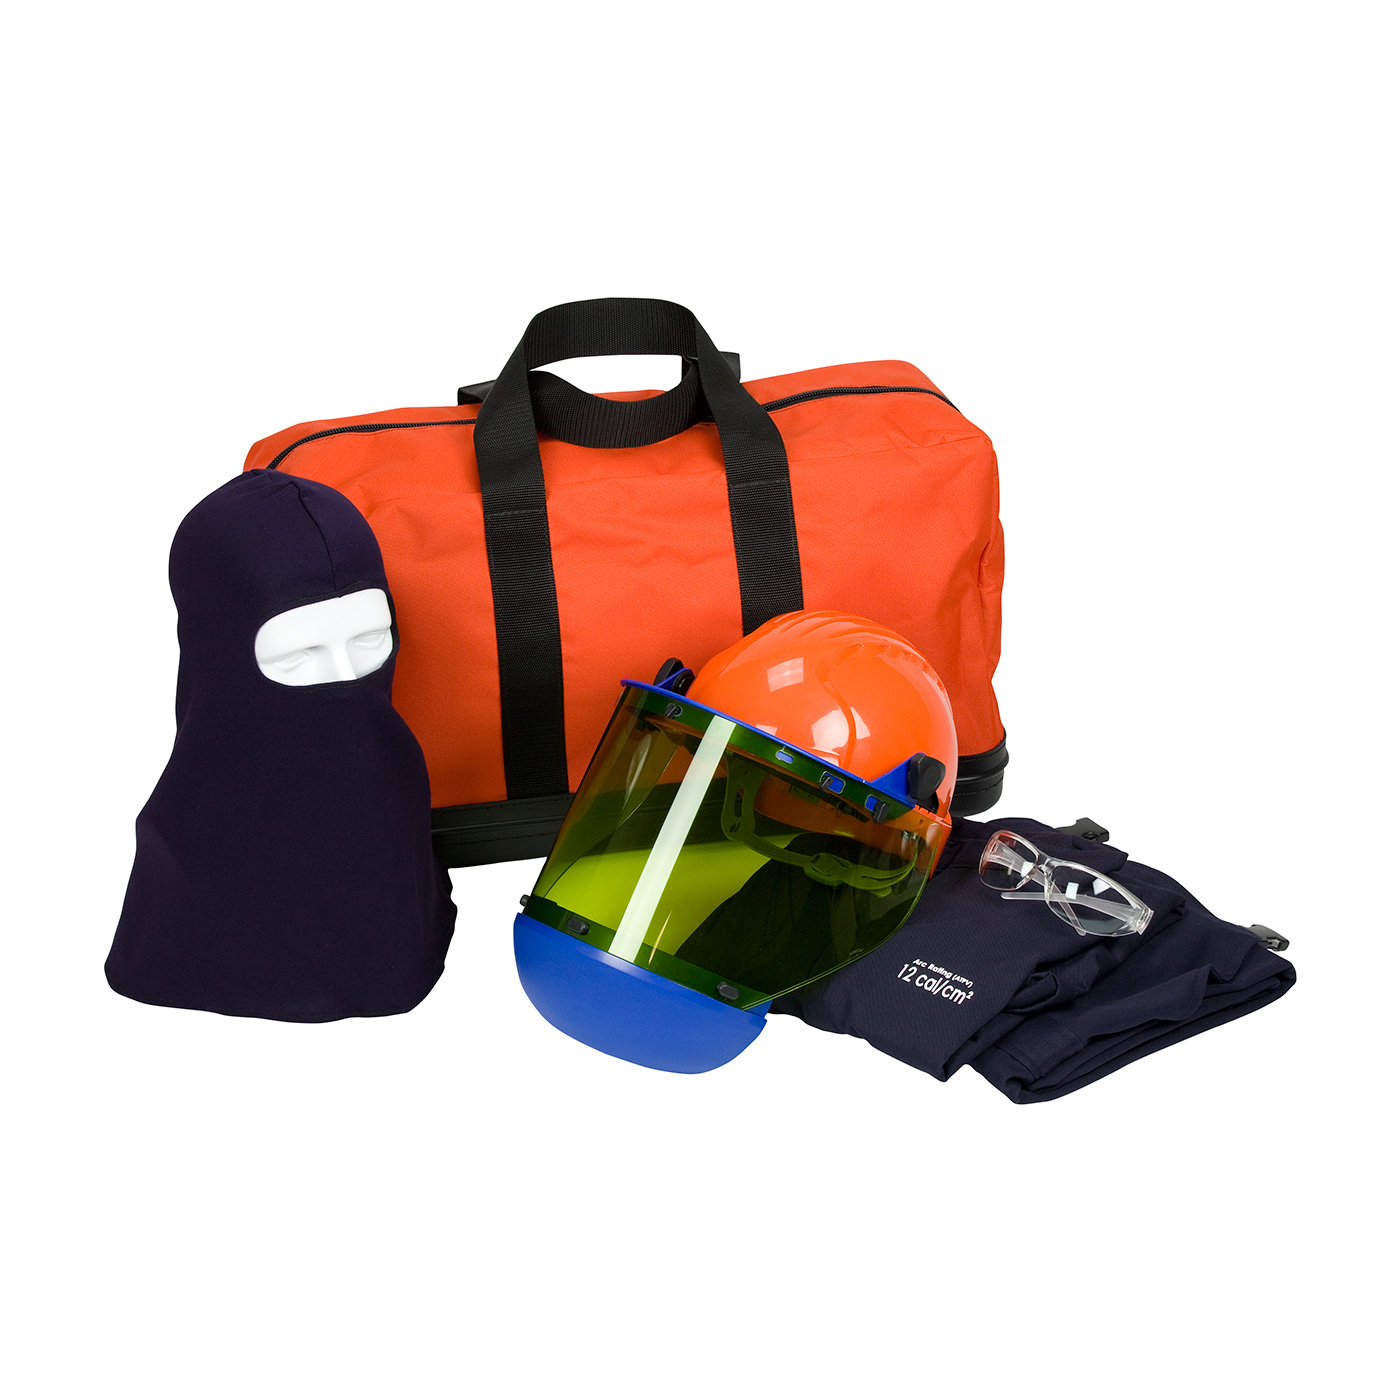 #9150-52810 PIP® PPE 2 Arc Flash Kit - 12 Cal/cm2 Contains  jacket, overpant, hard hat with arc shield, balaclava, safety glasses and carry bag